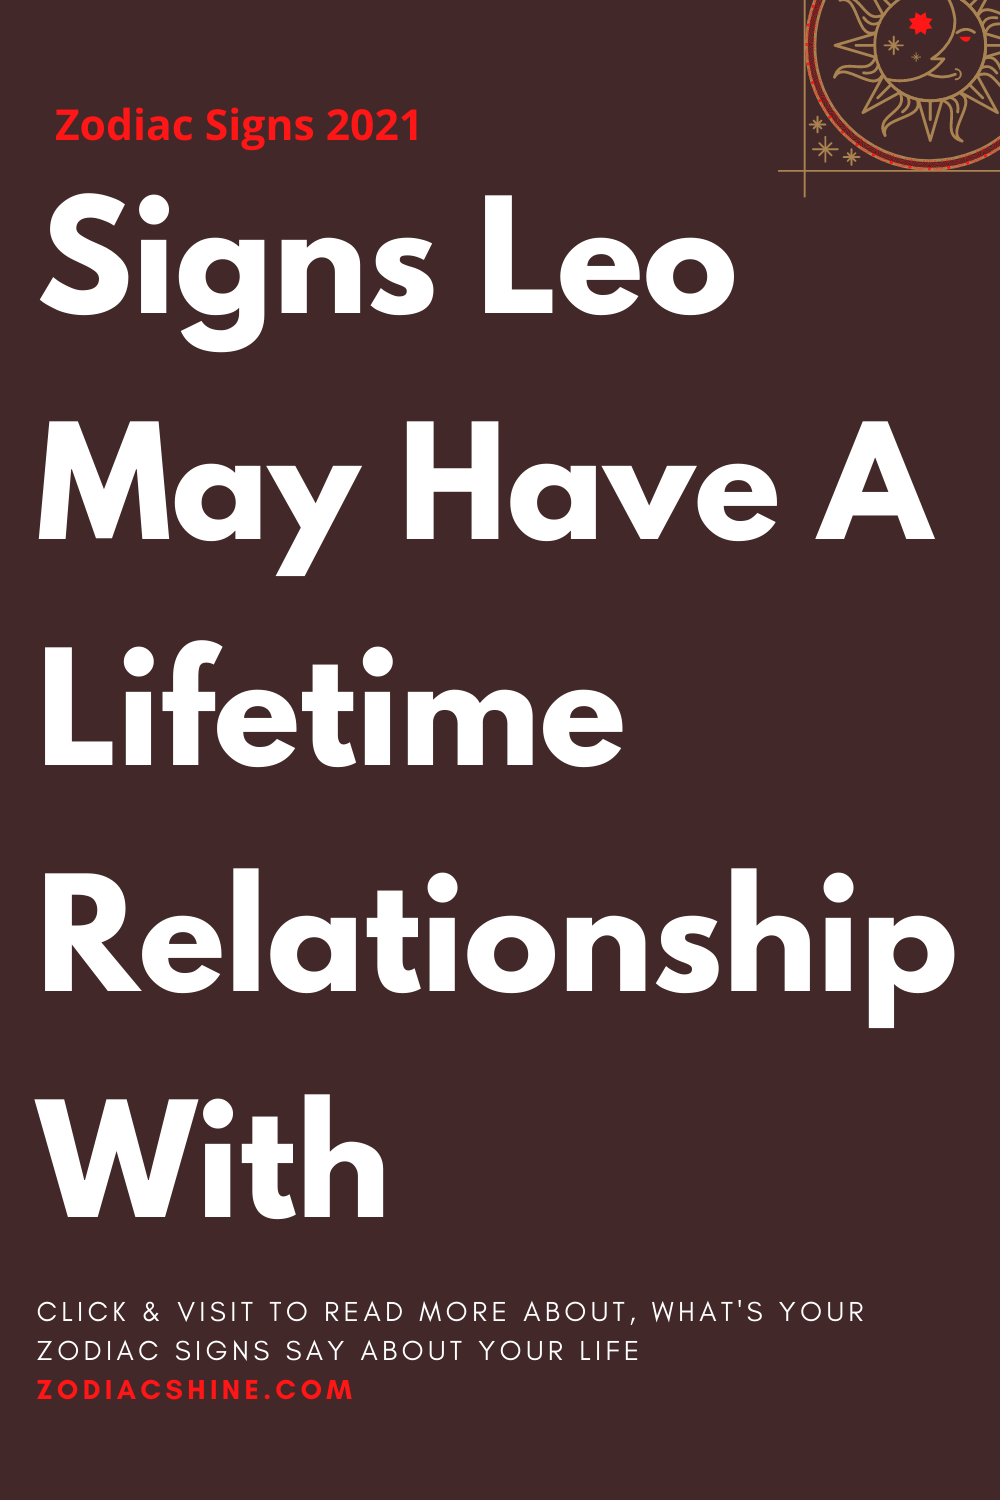 Signs Leo May Have A Lifetime Relationship With